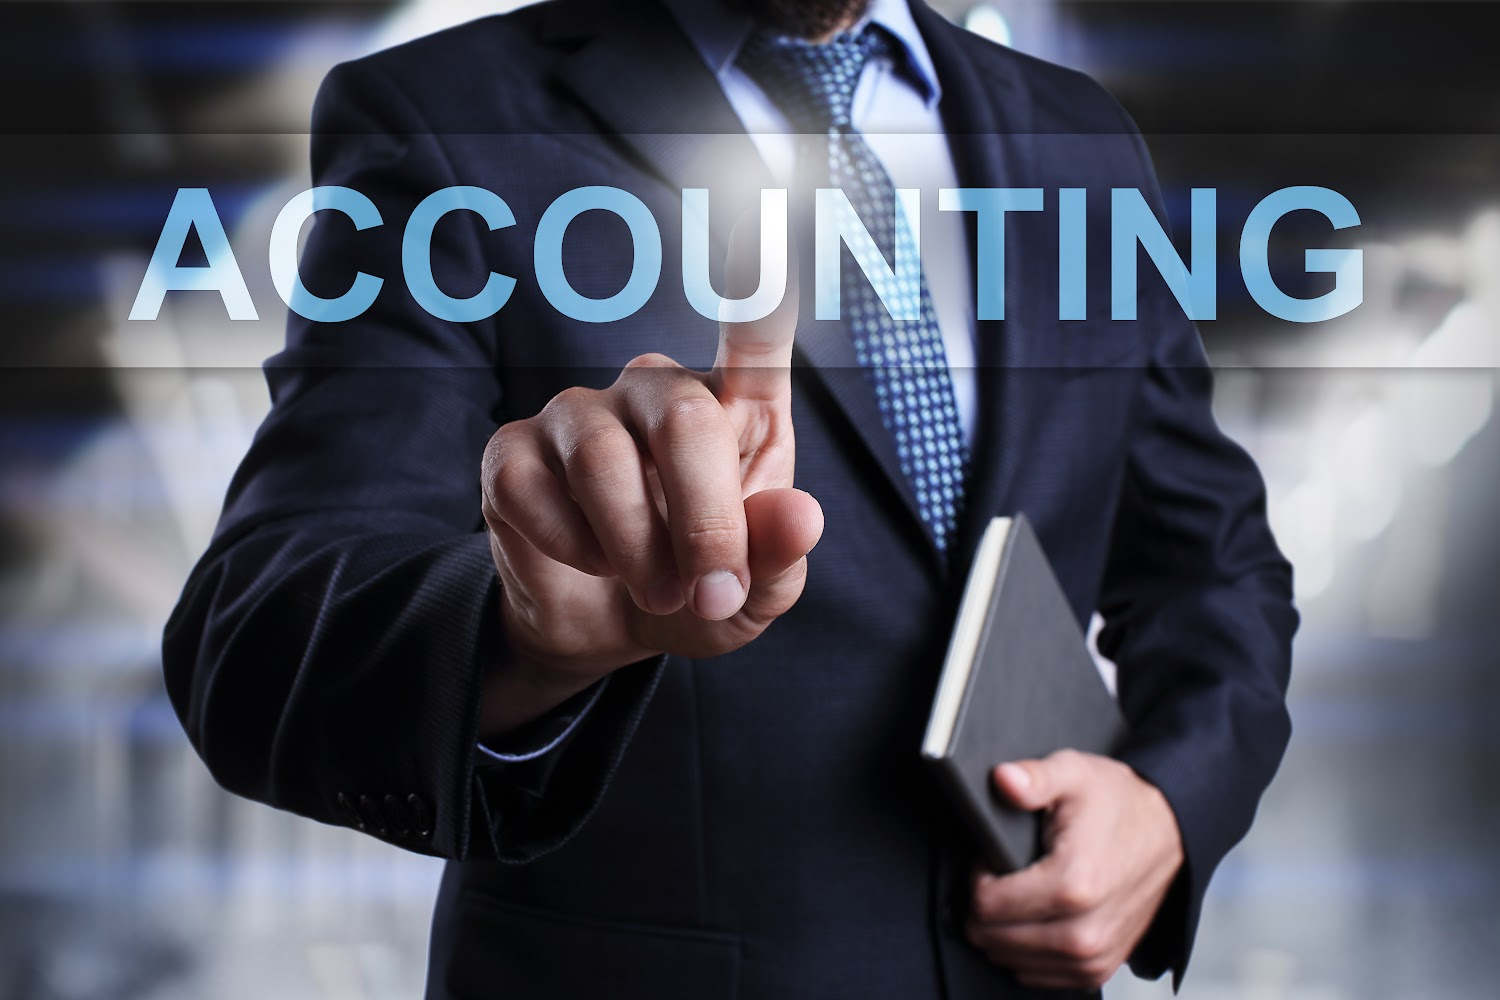 Why Use Accounting Software?